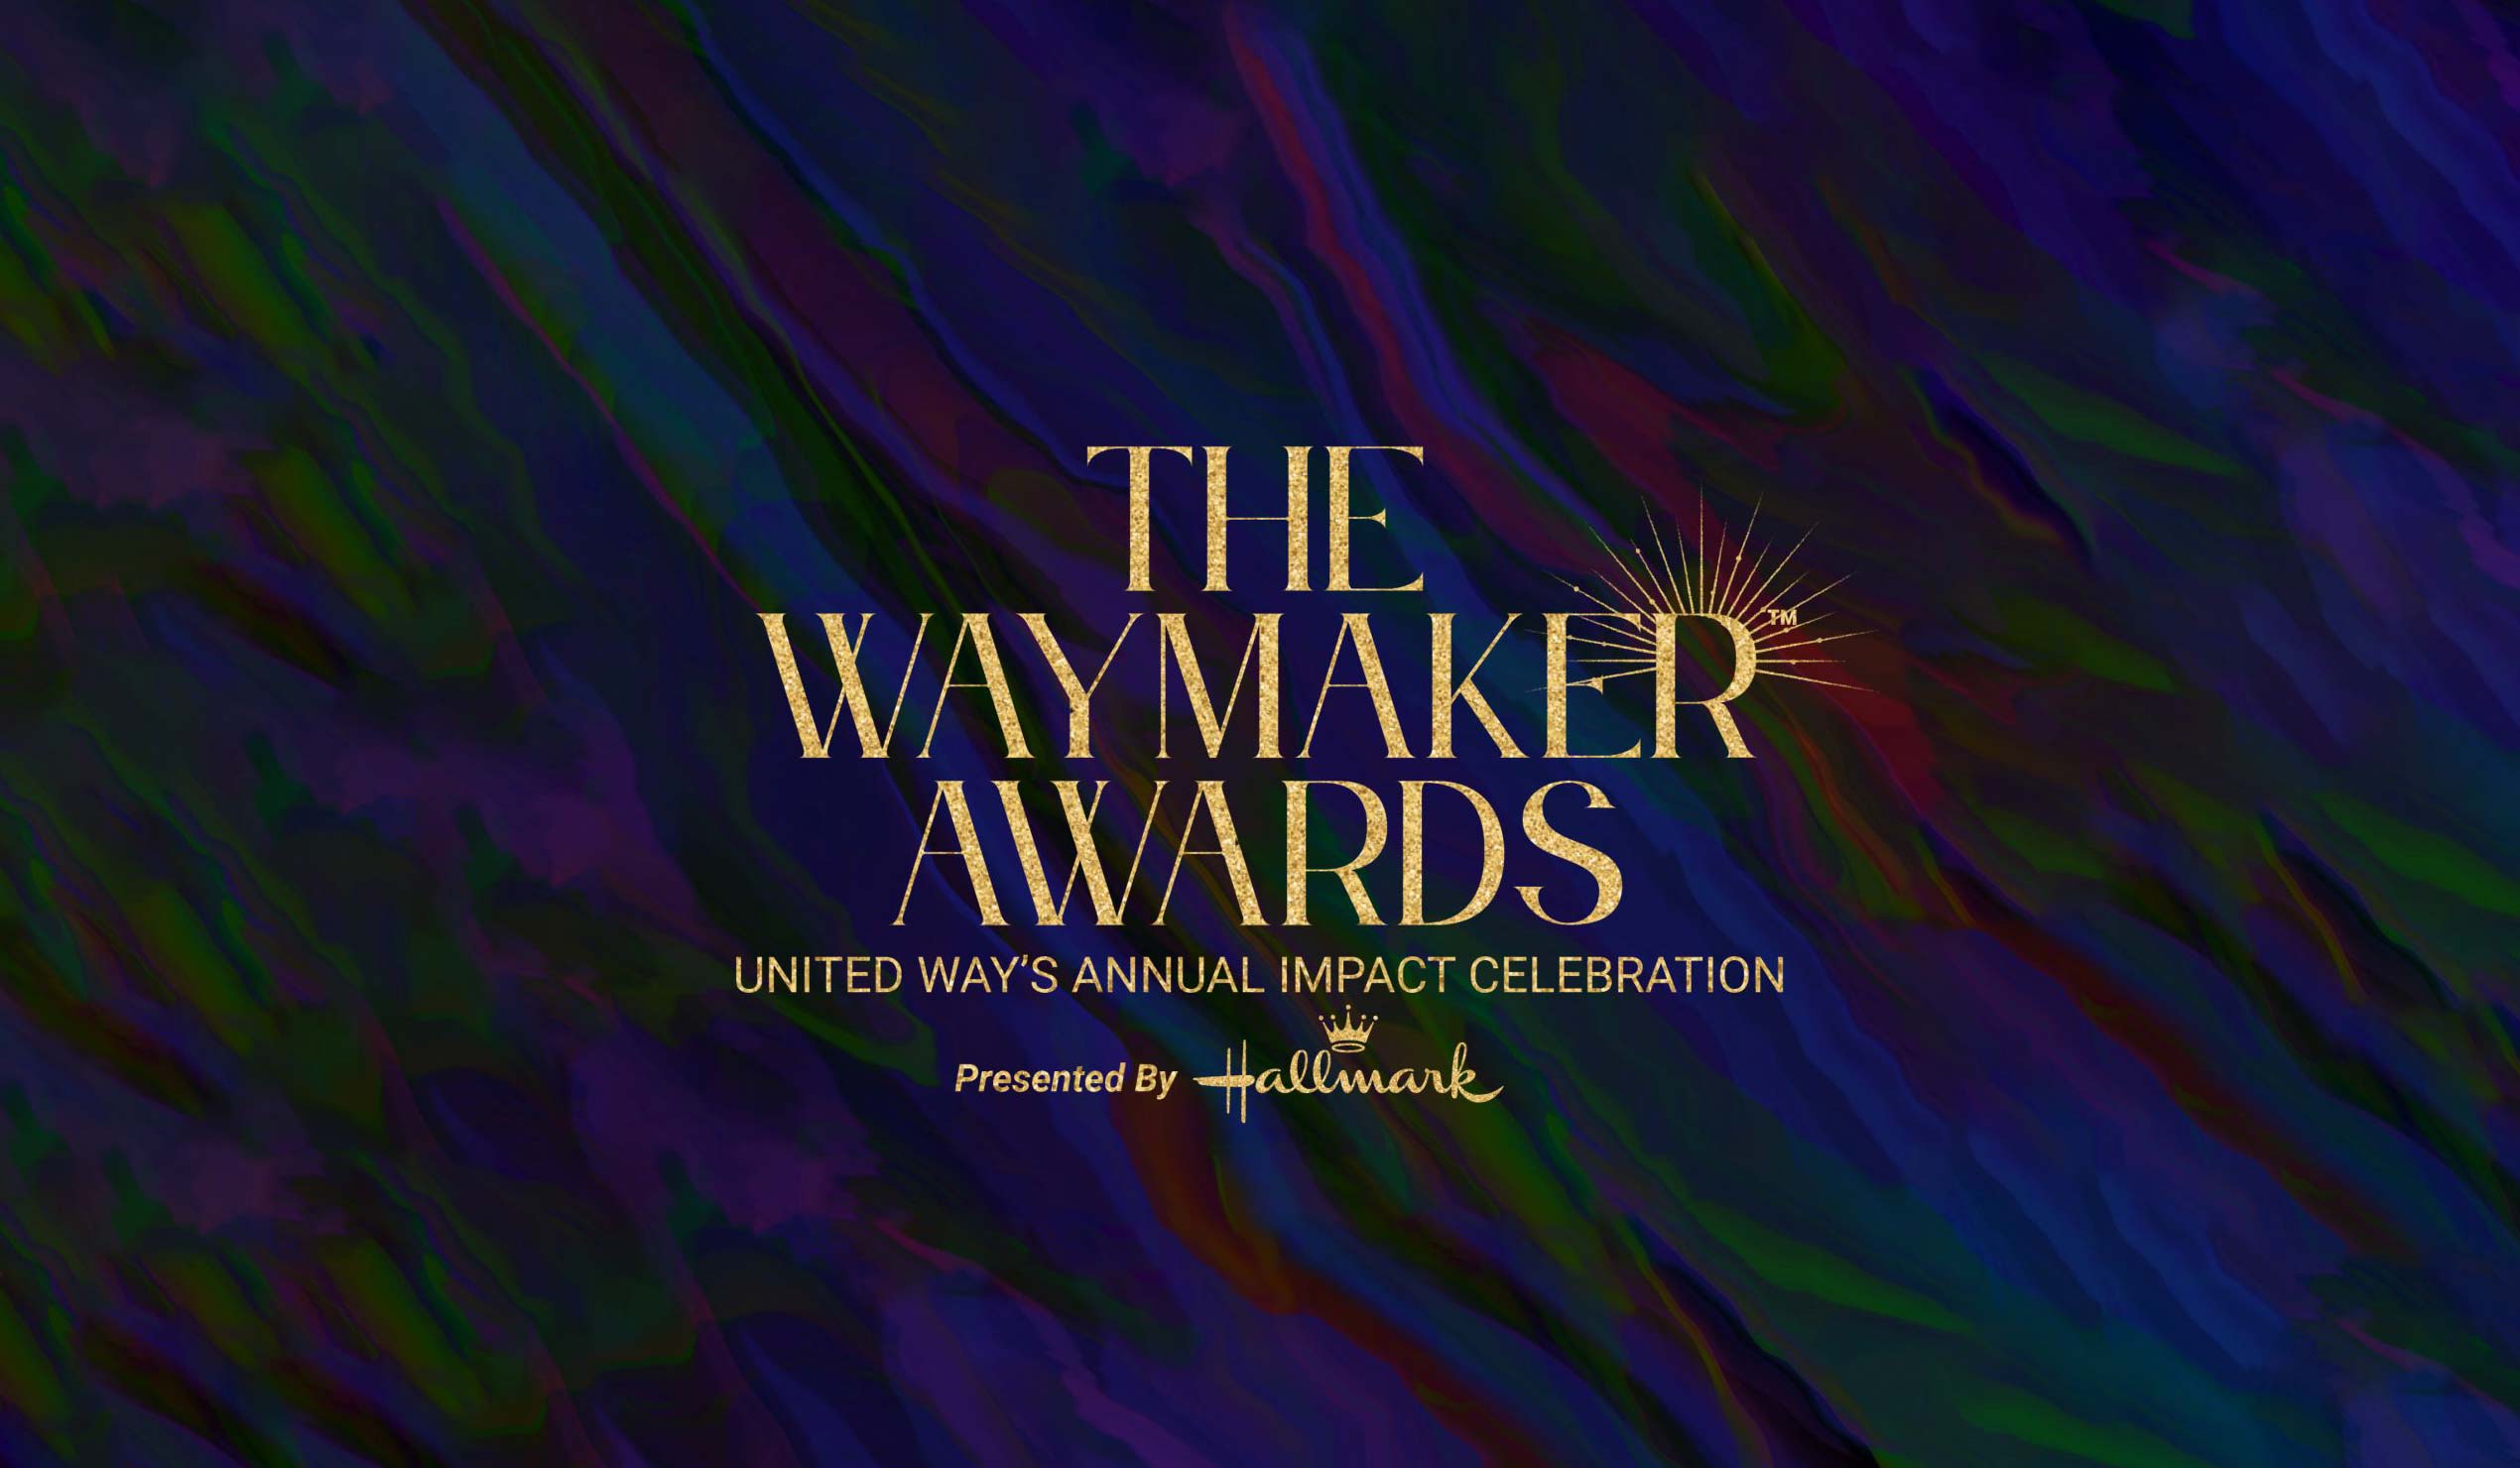 The Waymaker Awards, United Way's Annual Impact Celebration Presented by Hallmark on a deeply-colored marbeled background